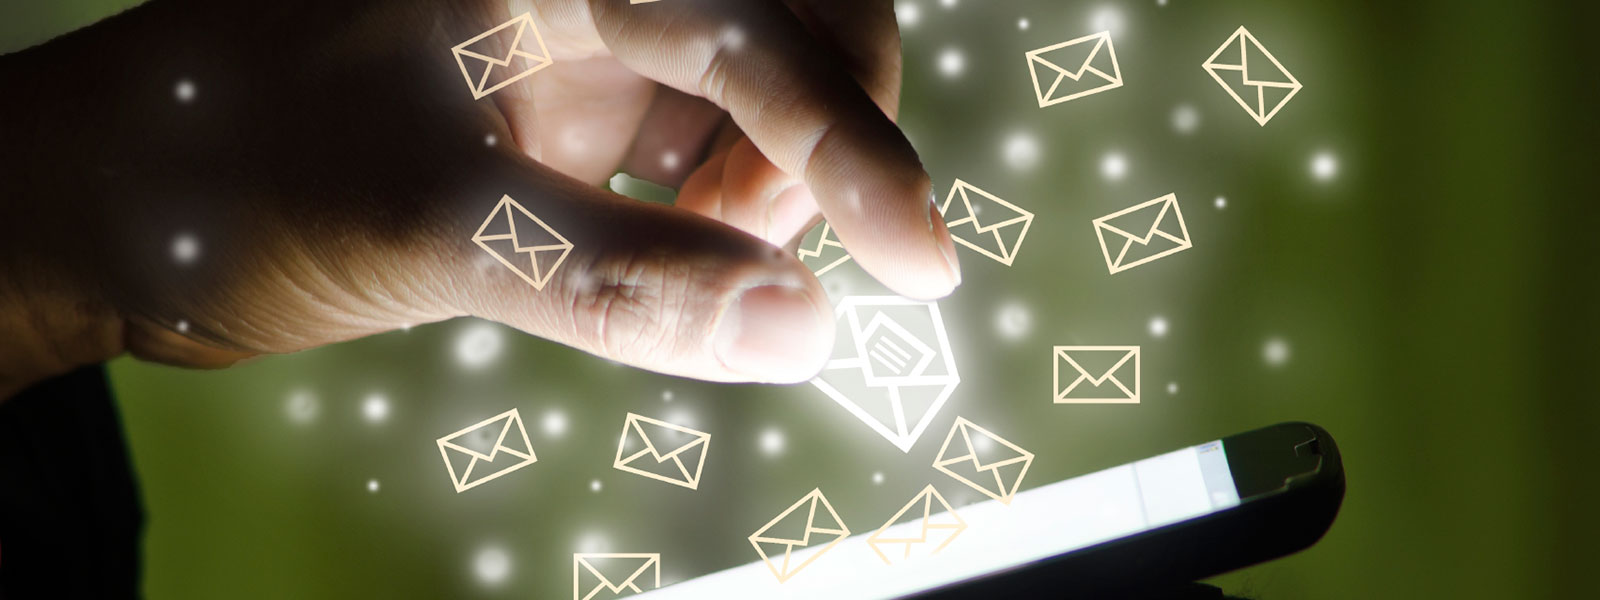 email marketing to grow your business